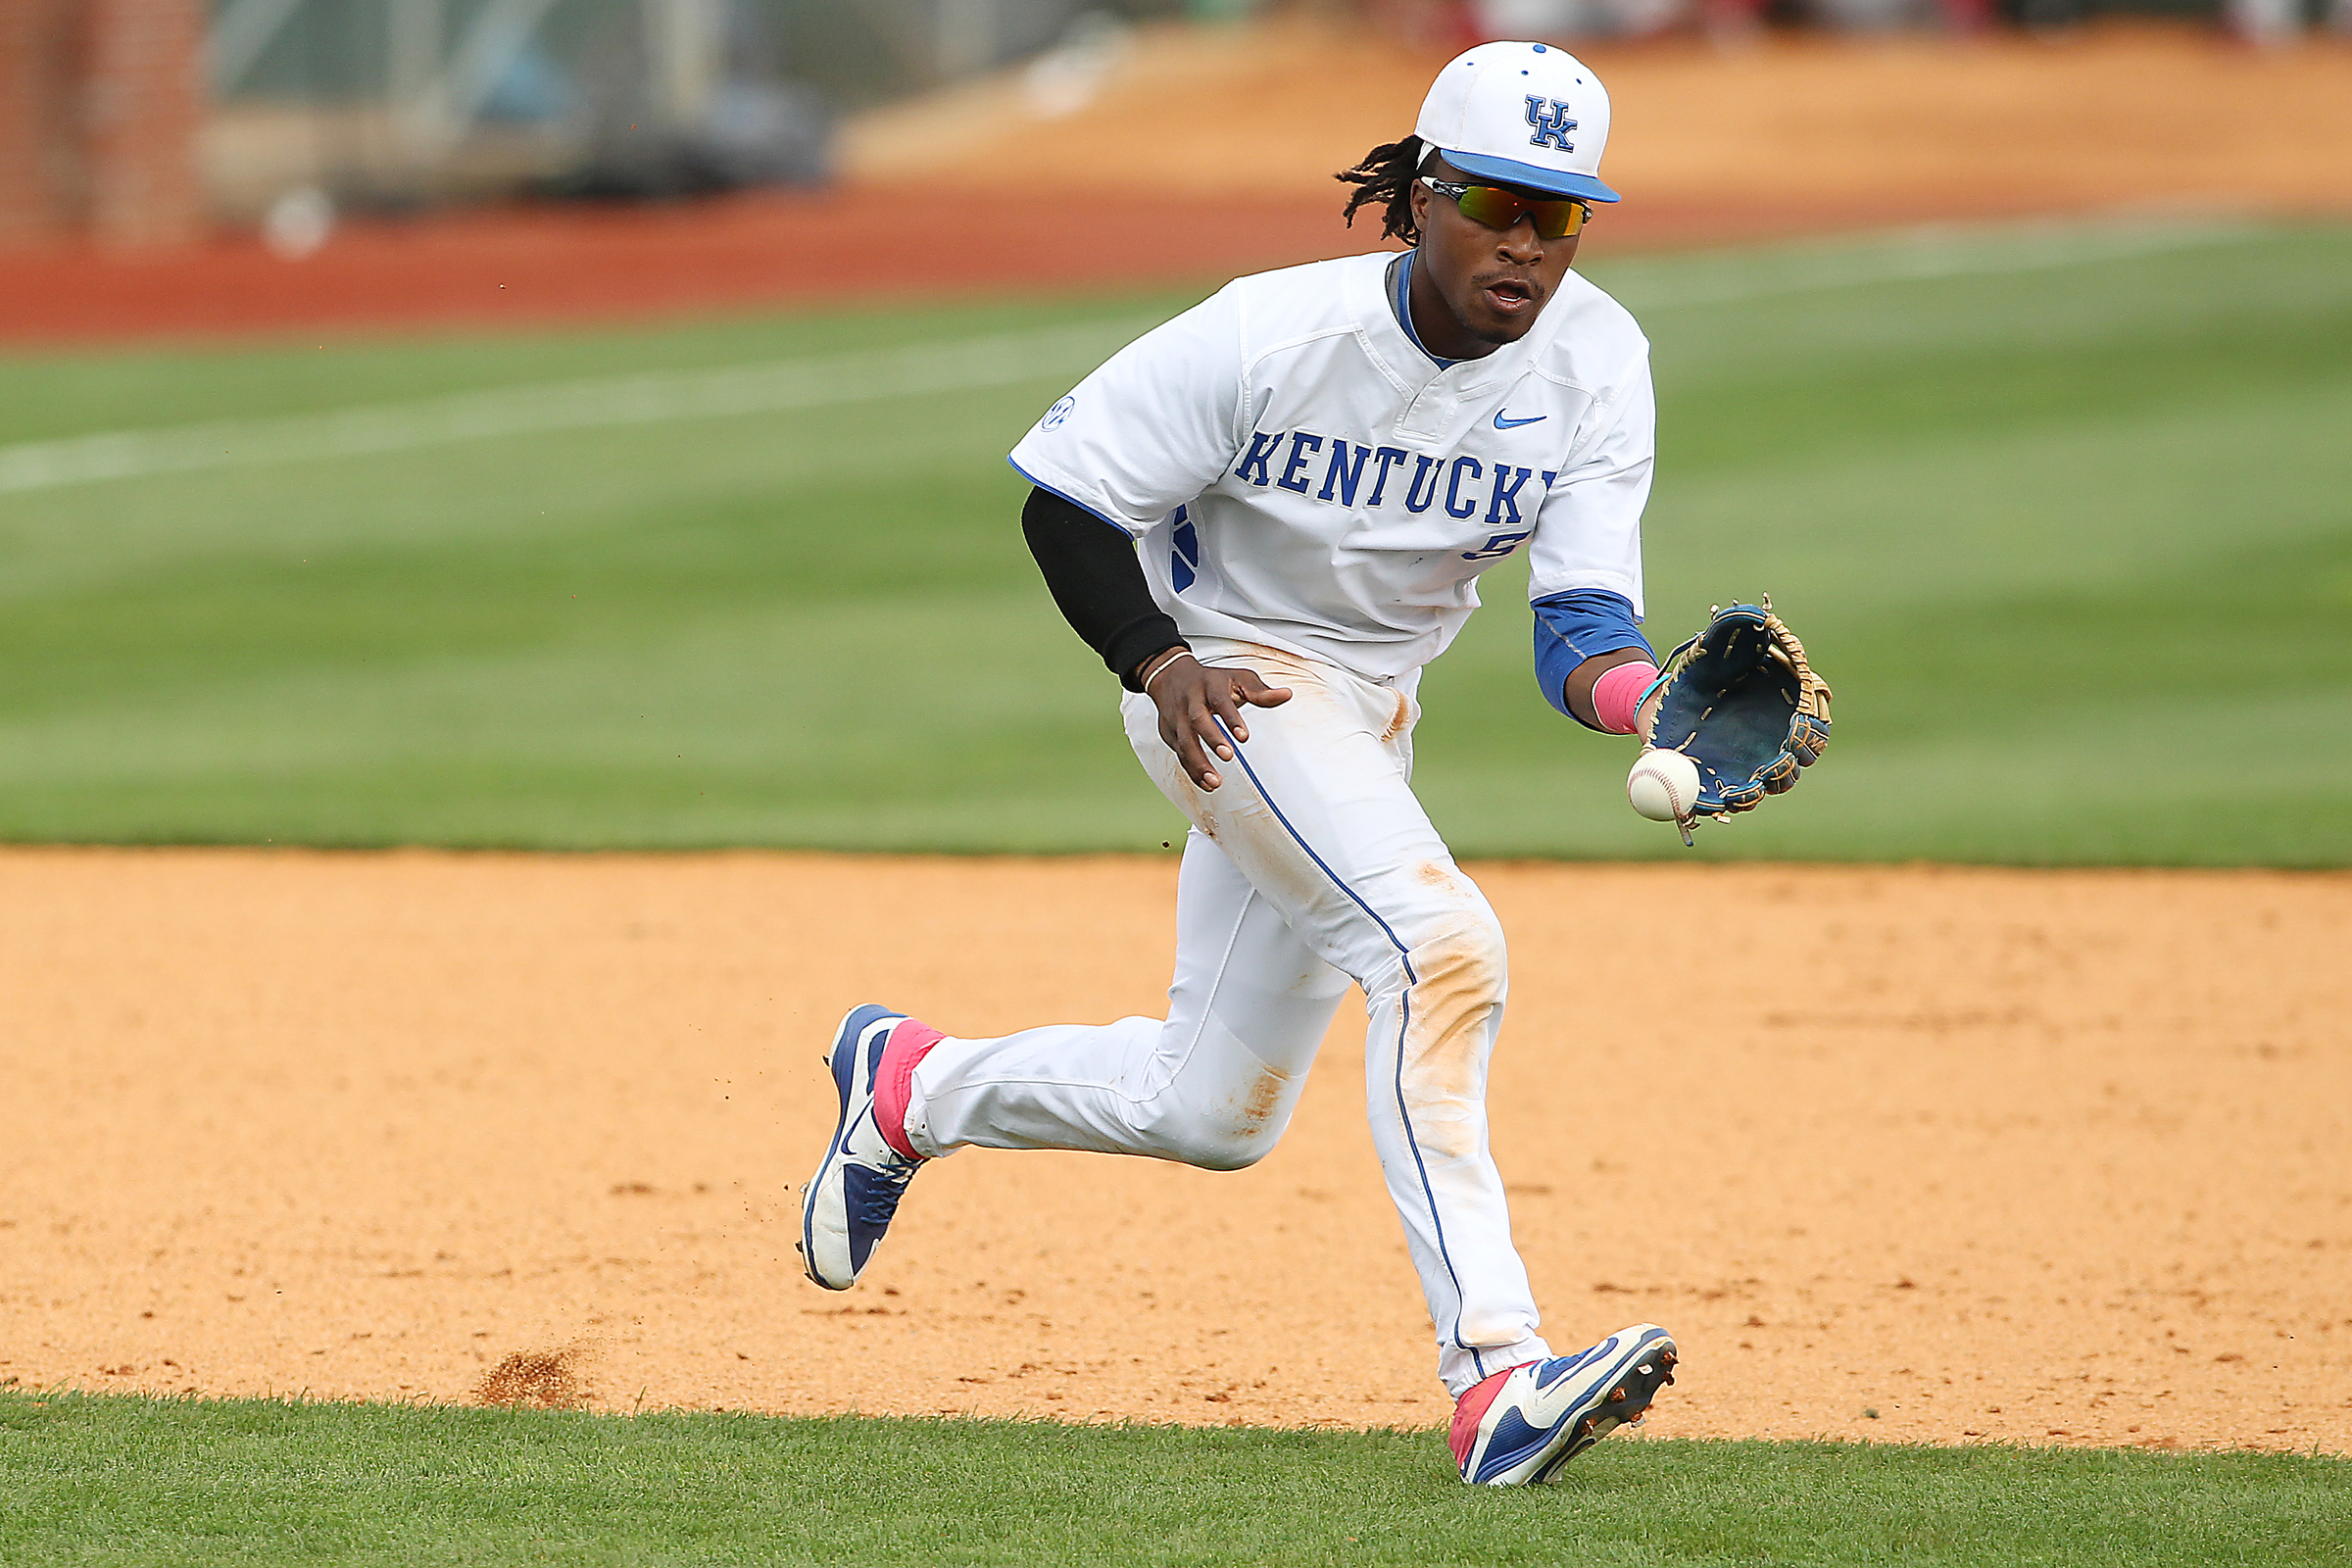 Wildcats Travel to No. 25 Indiana for Midweek Tilt